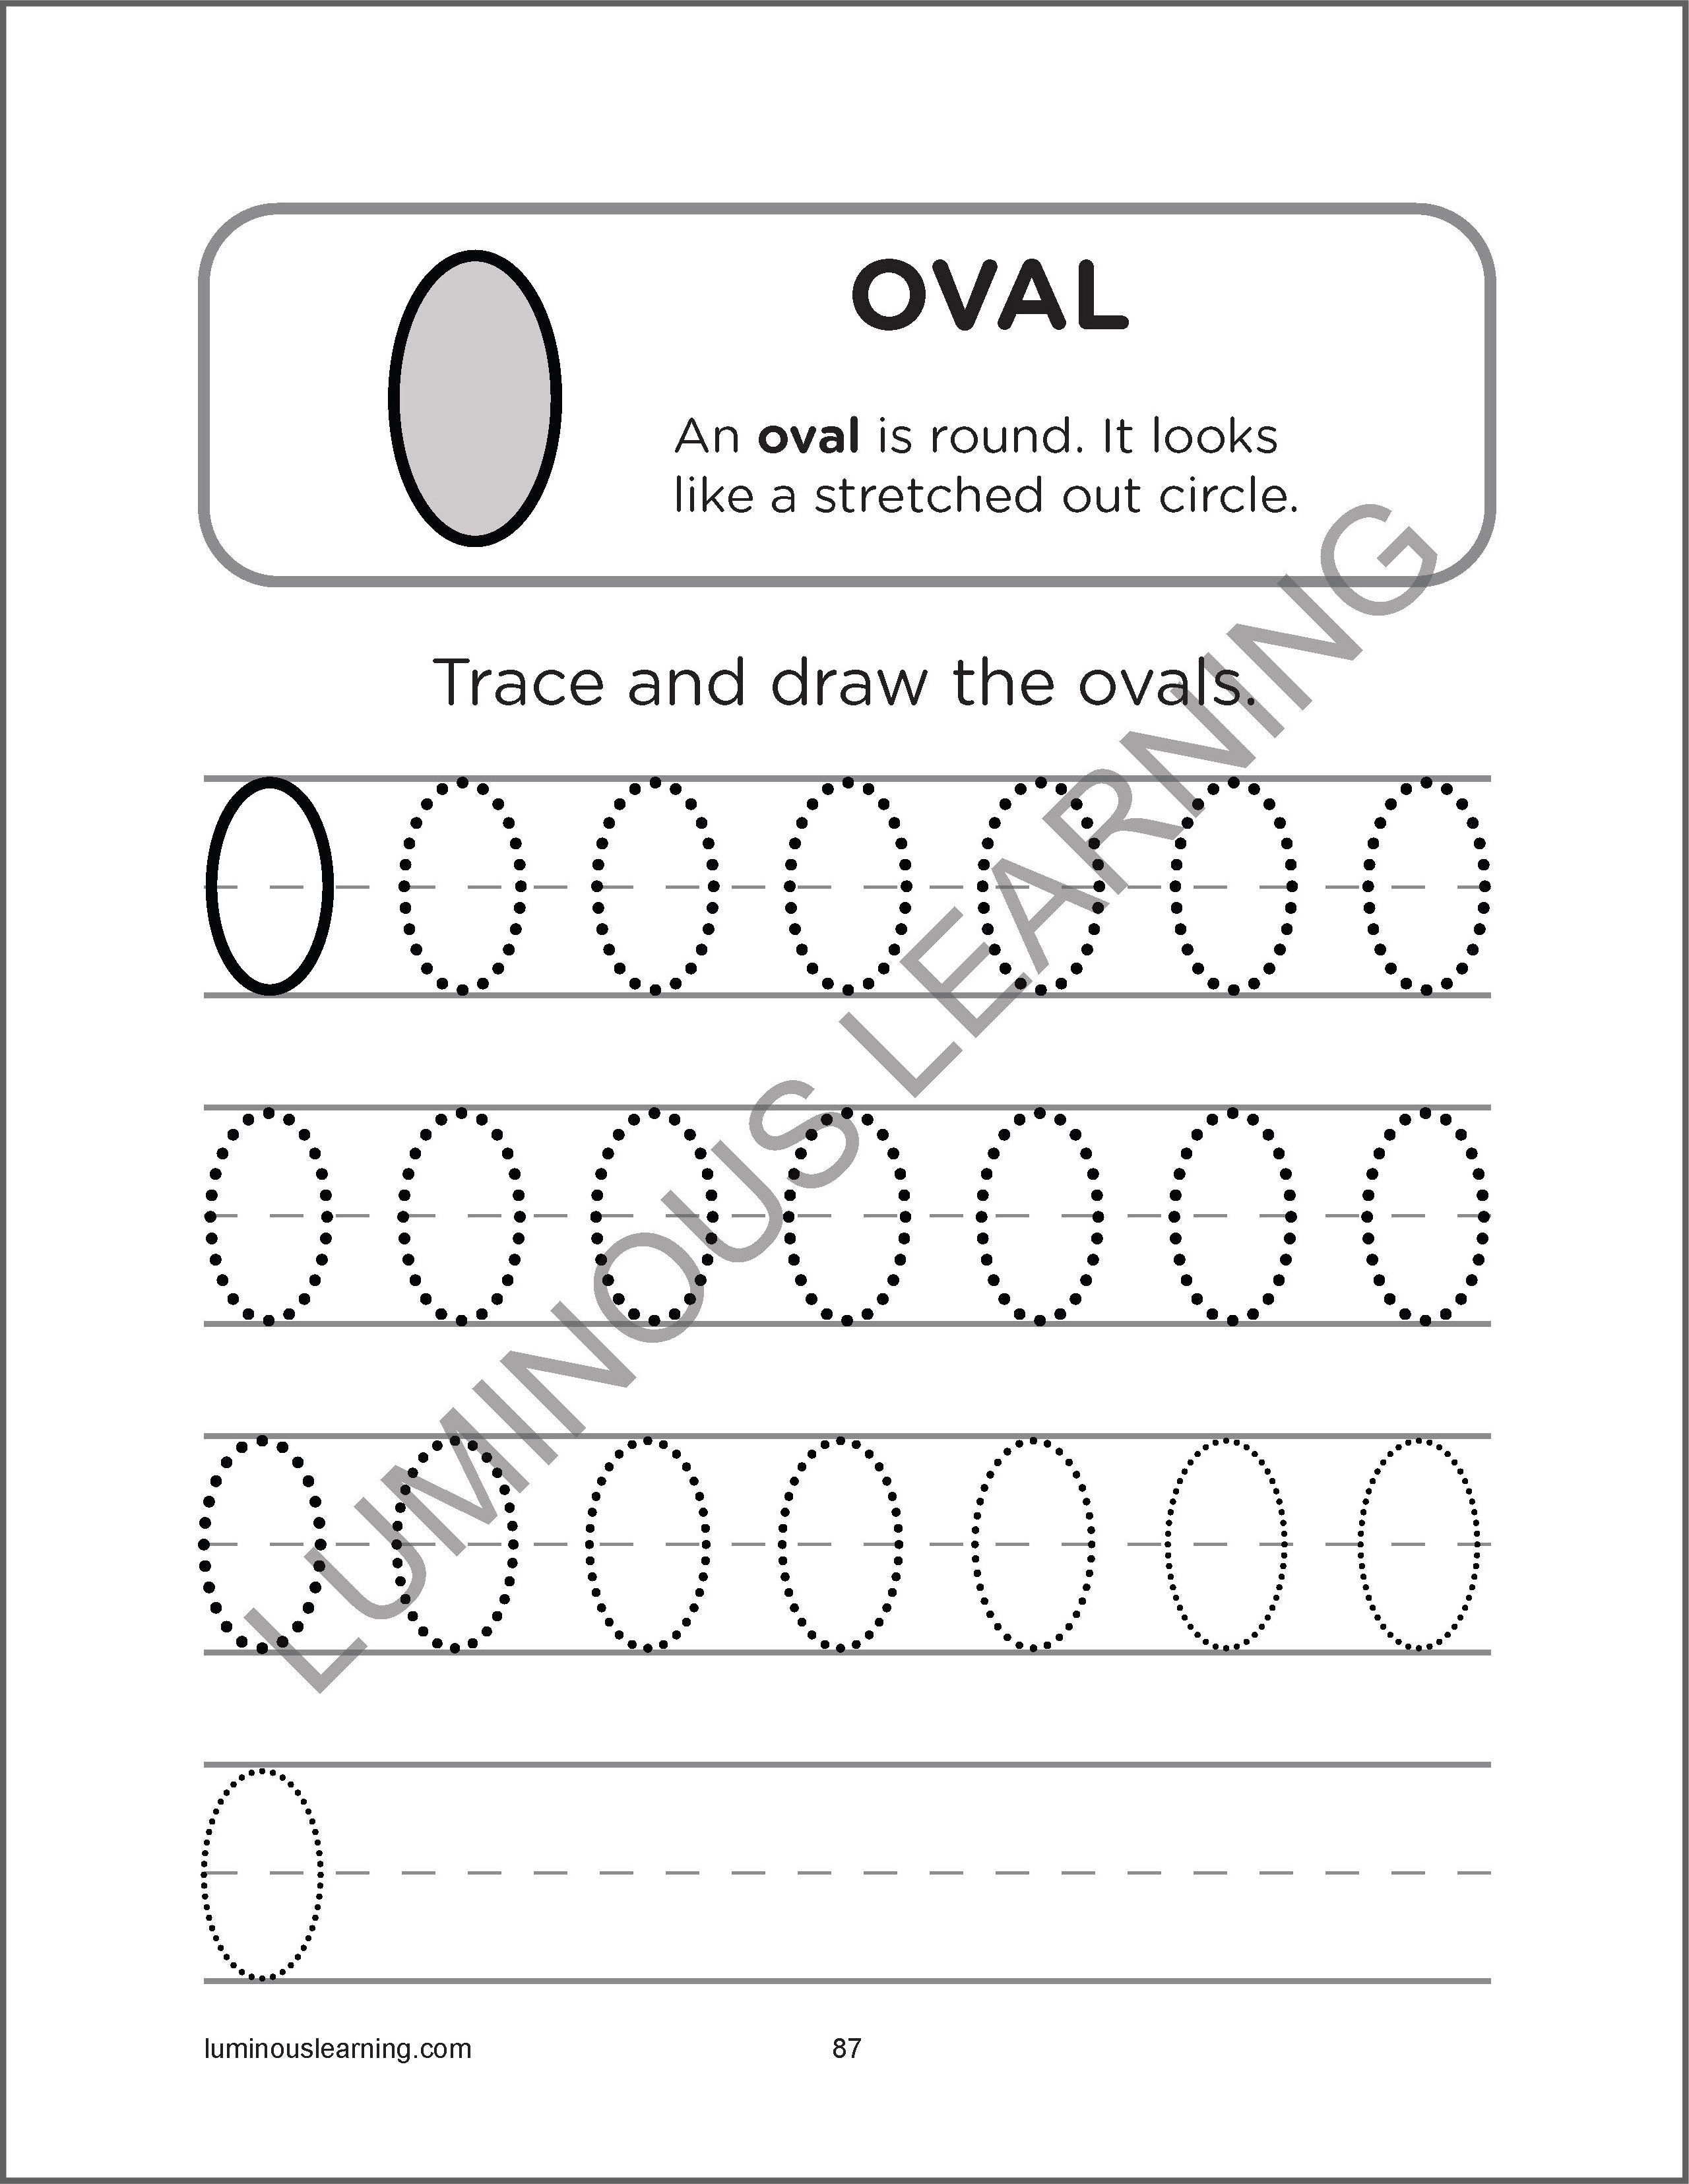 Number And Letter Tracing Book For Preschoolers: Math Activity